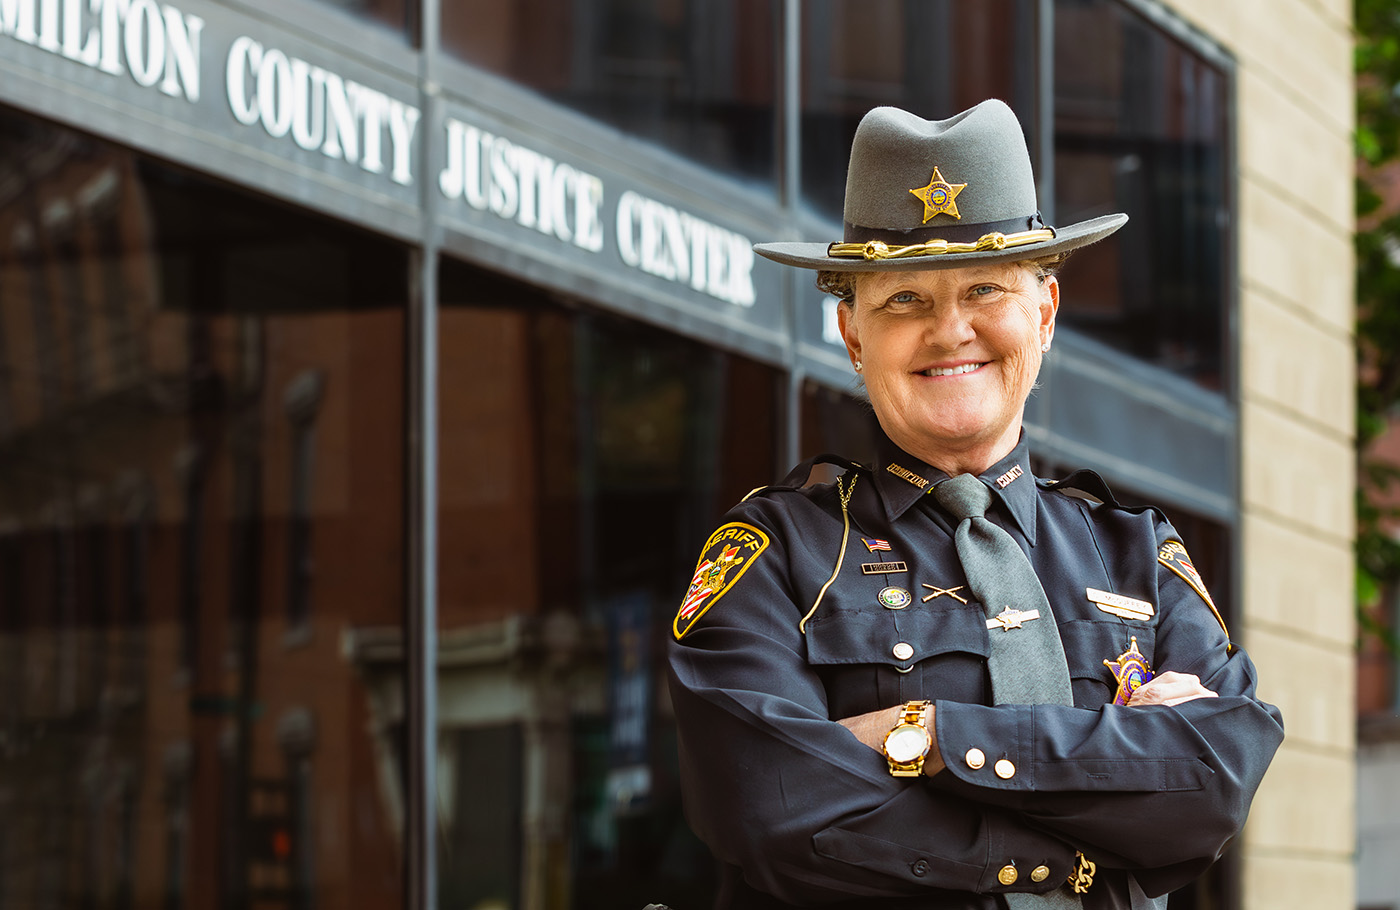 Sheriff McGuffey in uniform in front of the Hamilton County OH Justice Center